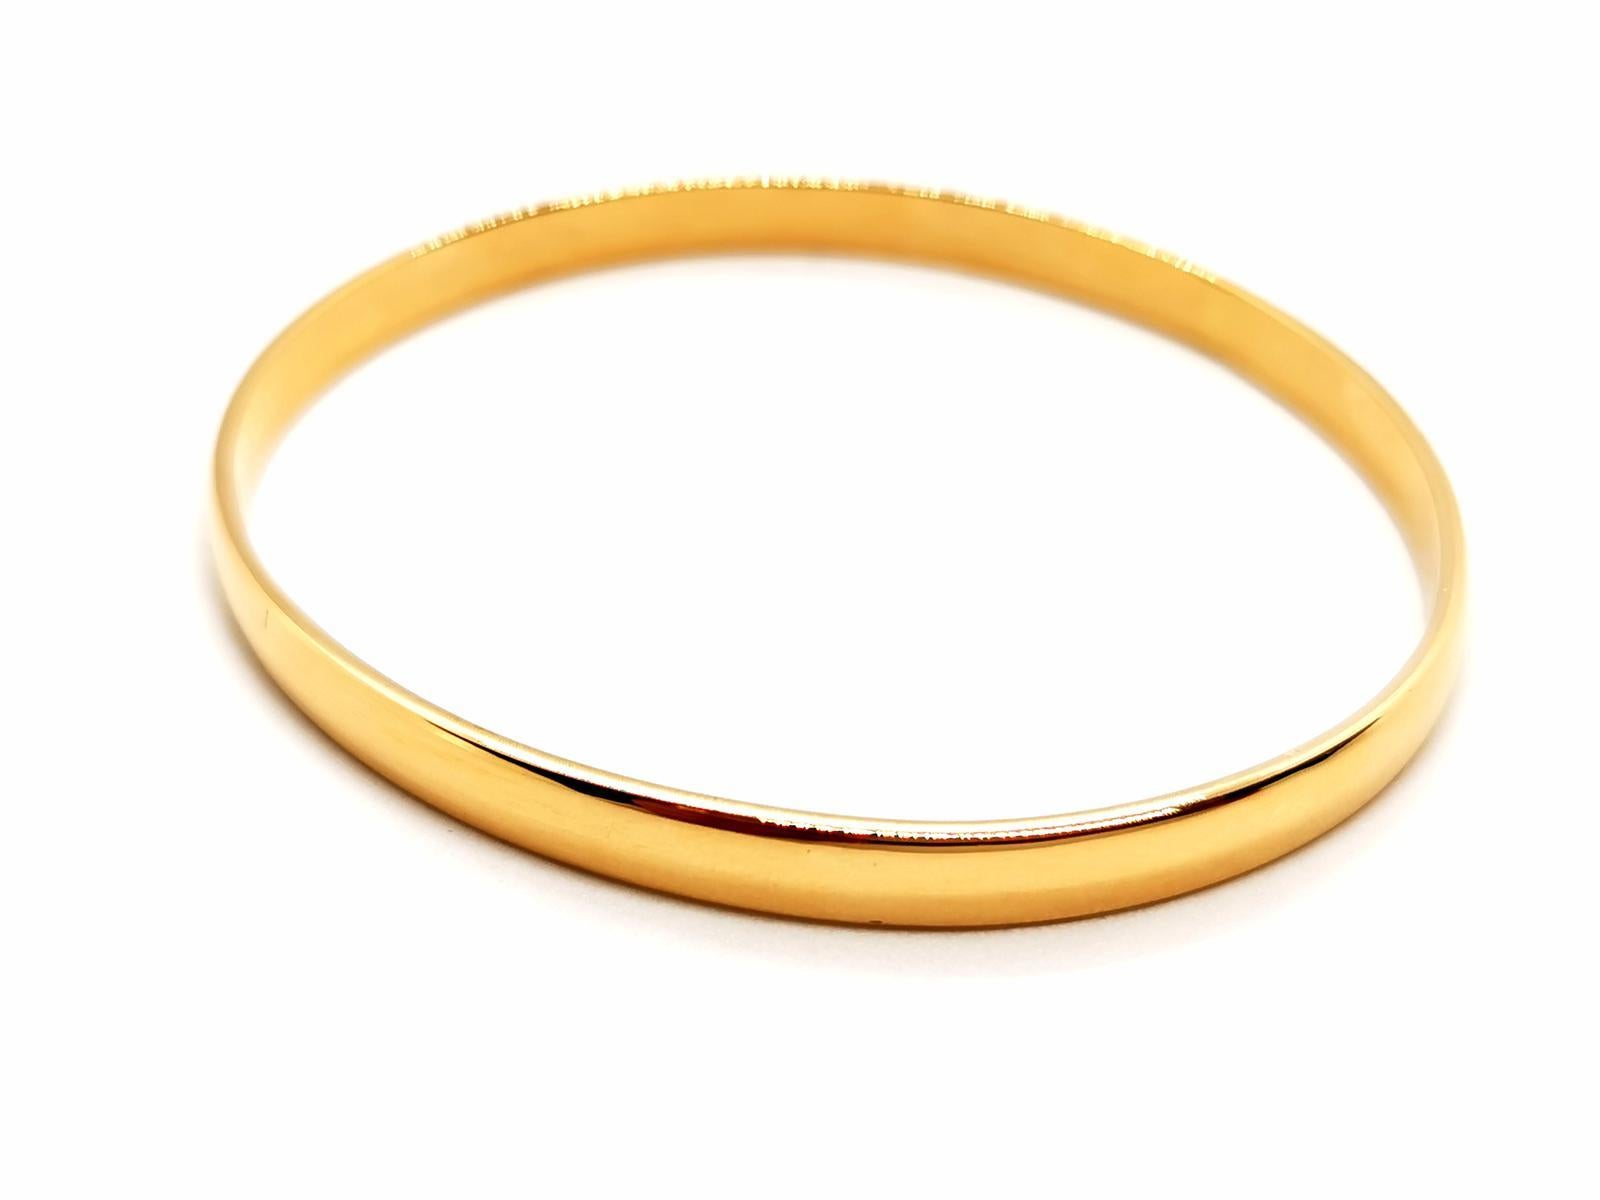 half bangle. gold yellow 750 mils (18 carats). curved oval shape. solid. inner diameter: 6.3 cm x 5.6 cm. height: 19 cm. width: 0.50 cm. total weight: 22 . 19 g. eagle head punch half erased. excellent condition.
